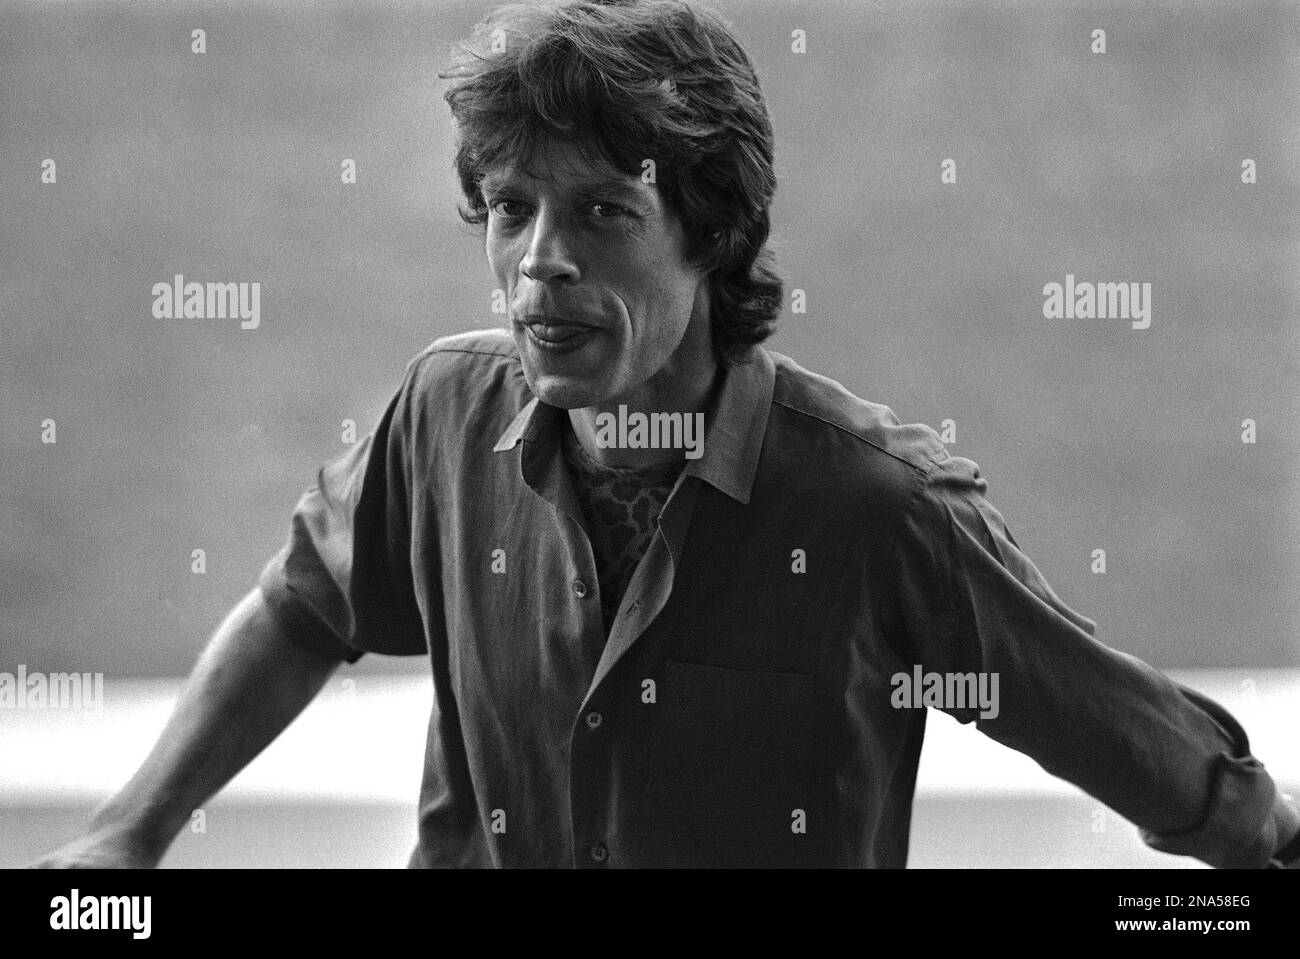 Mick Jagger from The Rolling Stones poses during a visit to the Hippodrome D 'Auteuil in Paris, France on May 18, 1982. The Stones will play at the  racing venue in June along